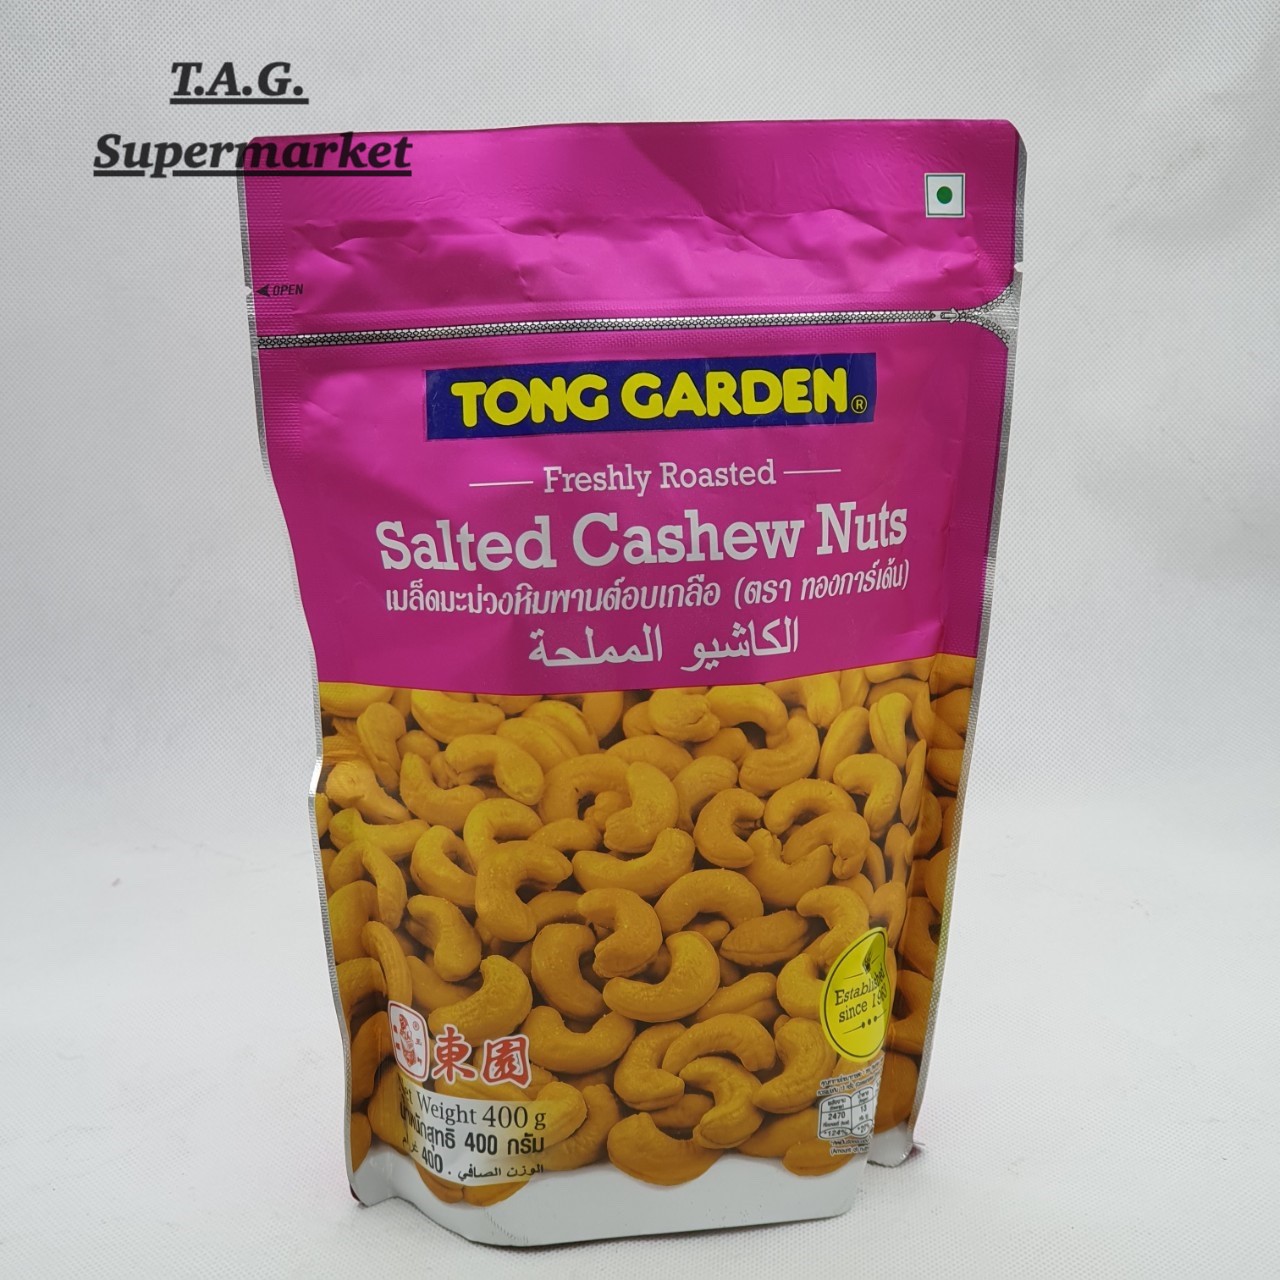 tong garden salted cashew nuts 400 g